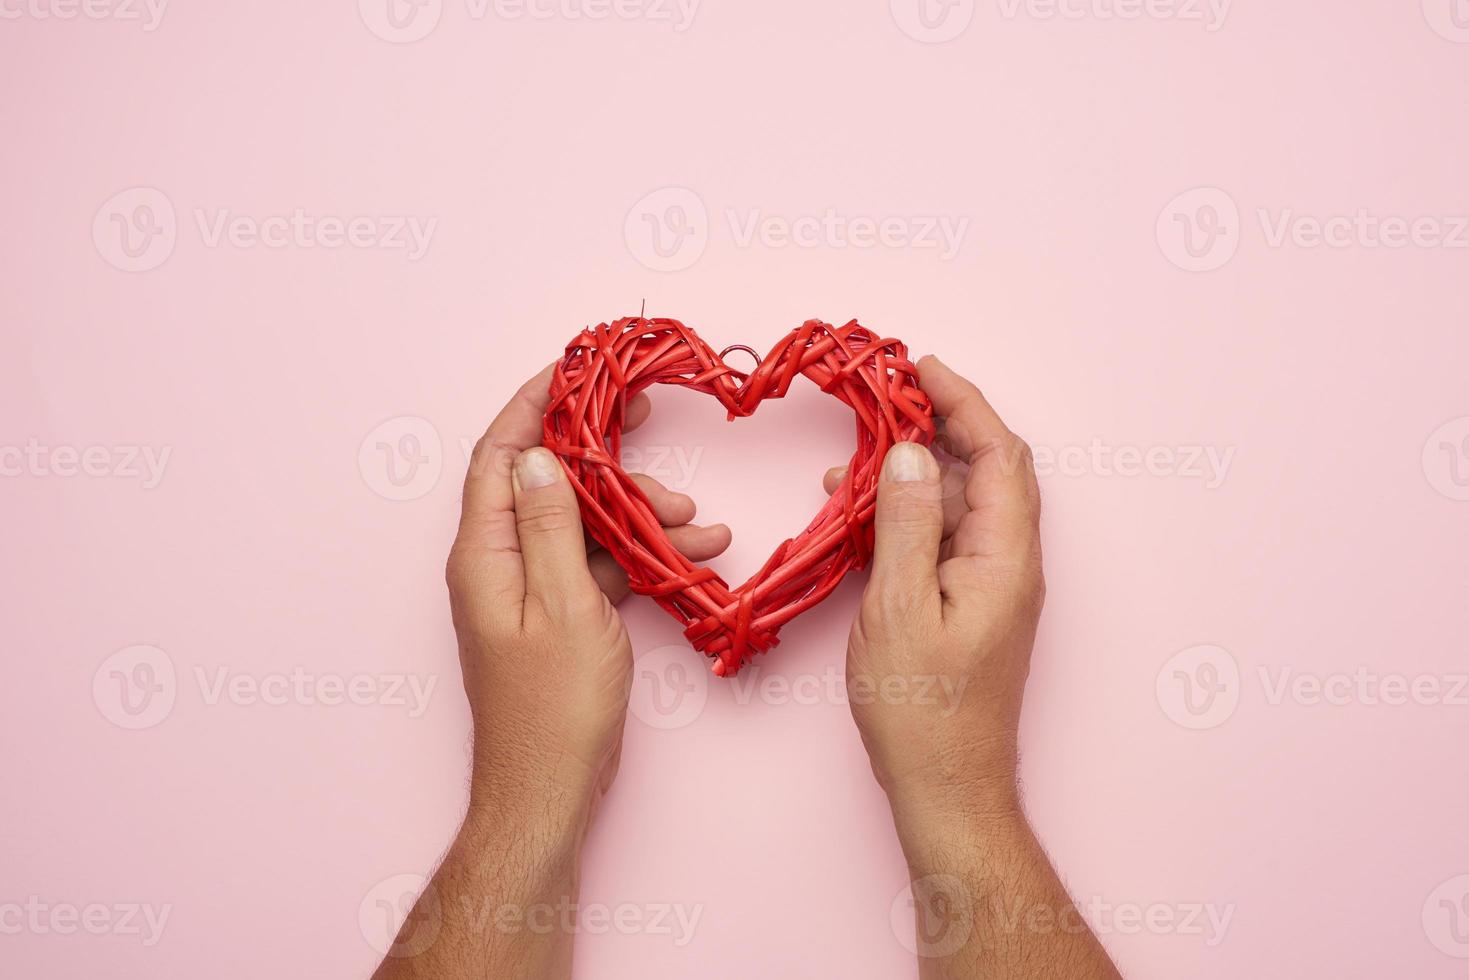 two male hands holding a red wicker heart on a pink background photo